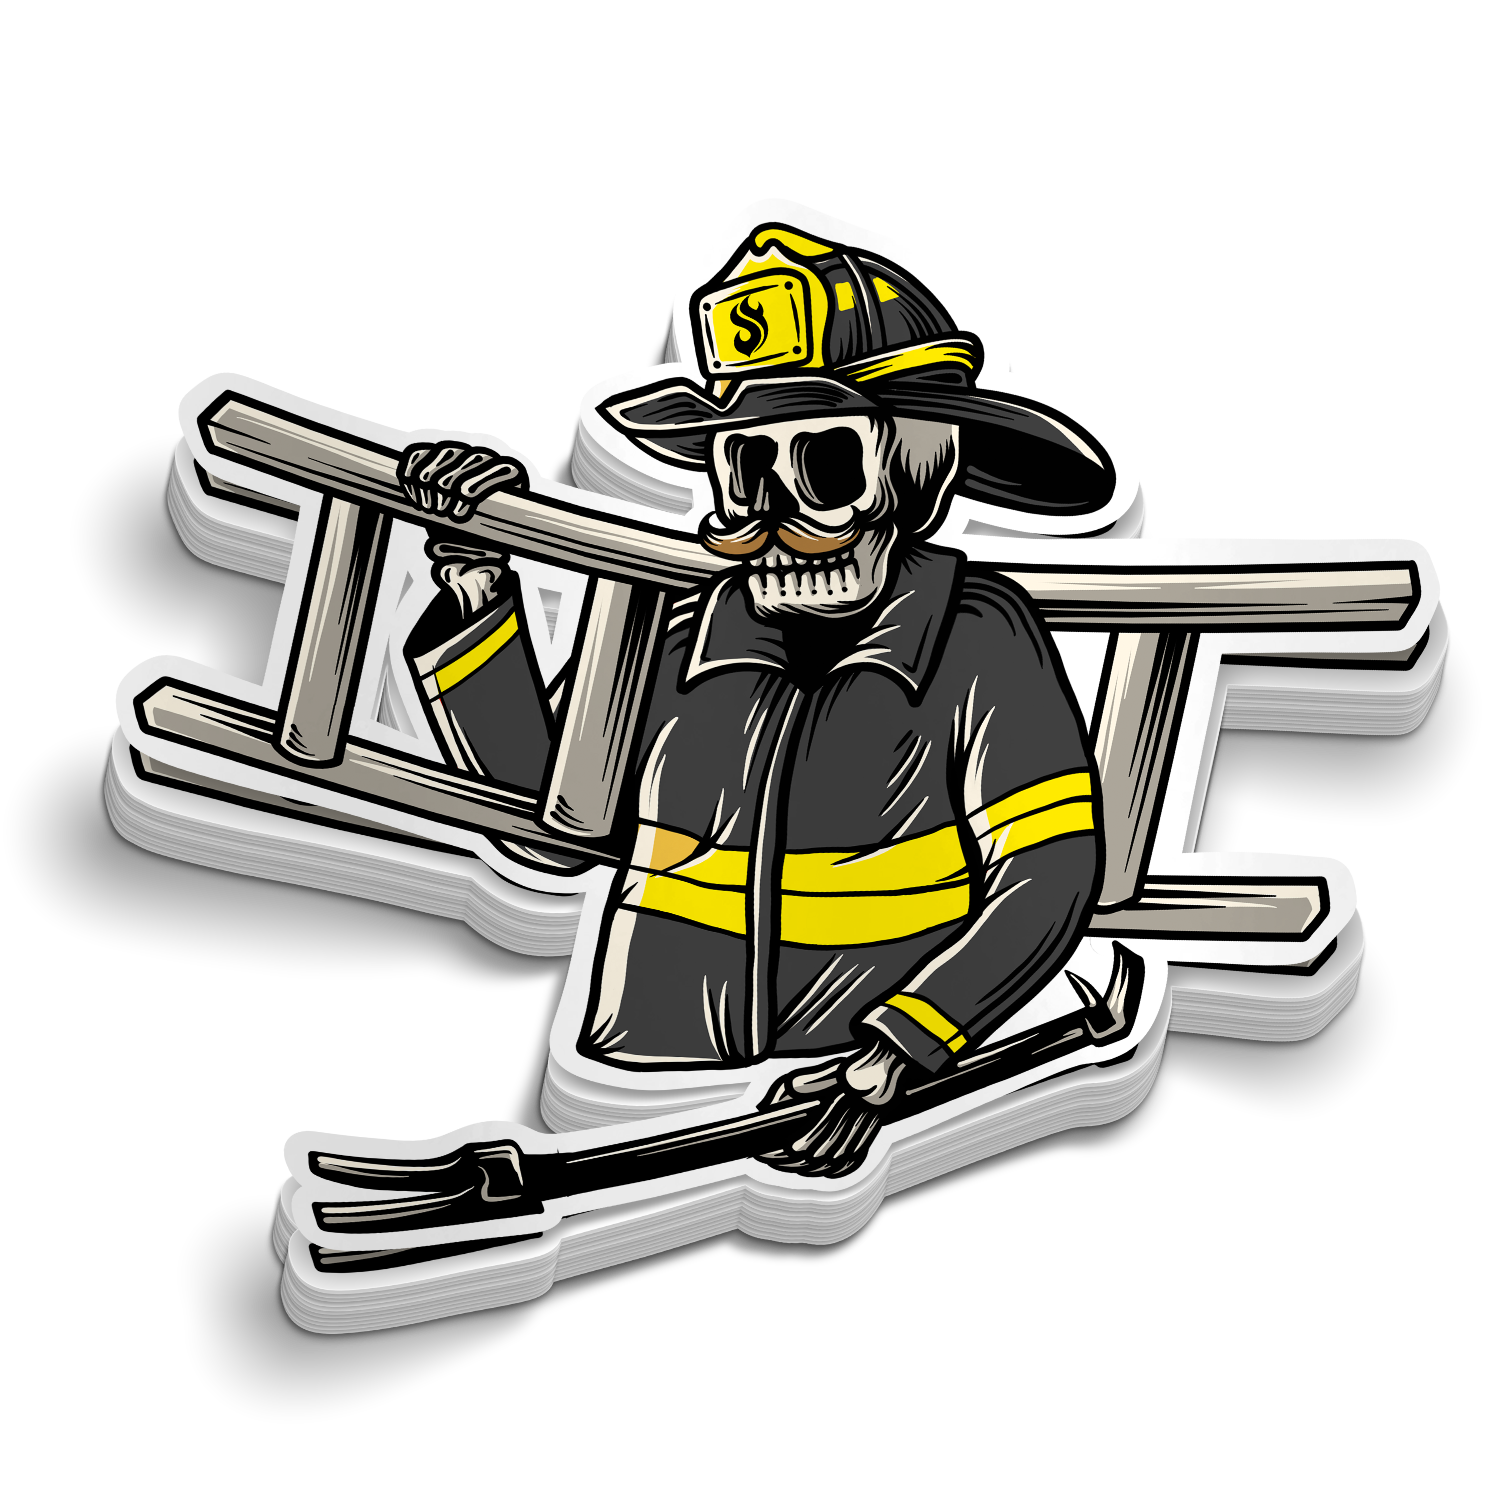 The Goon Squad - Ladder Man Decal